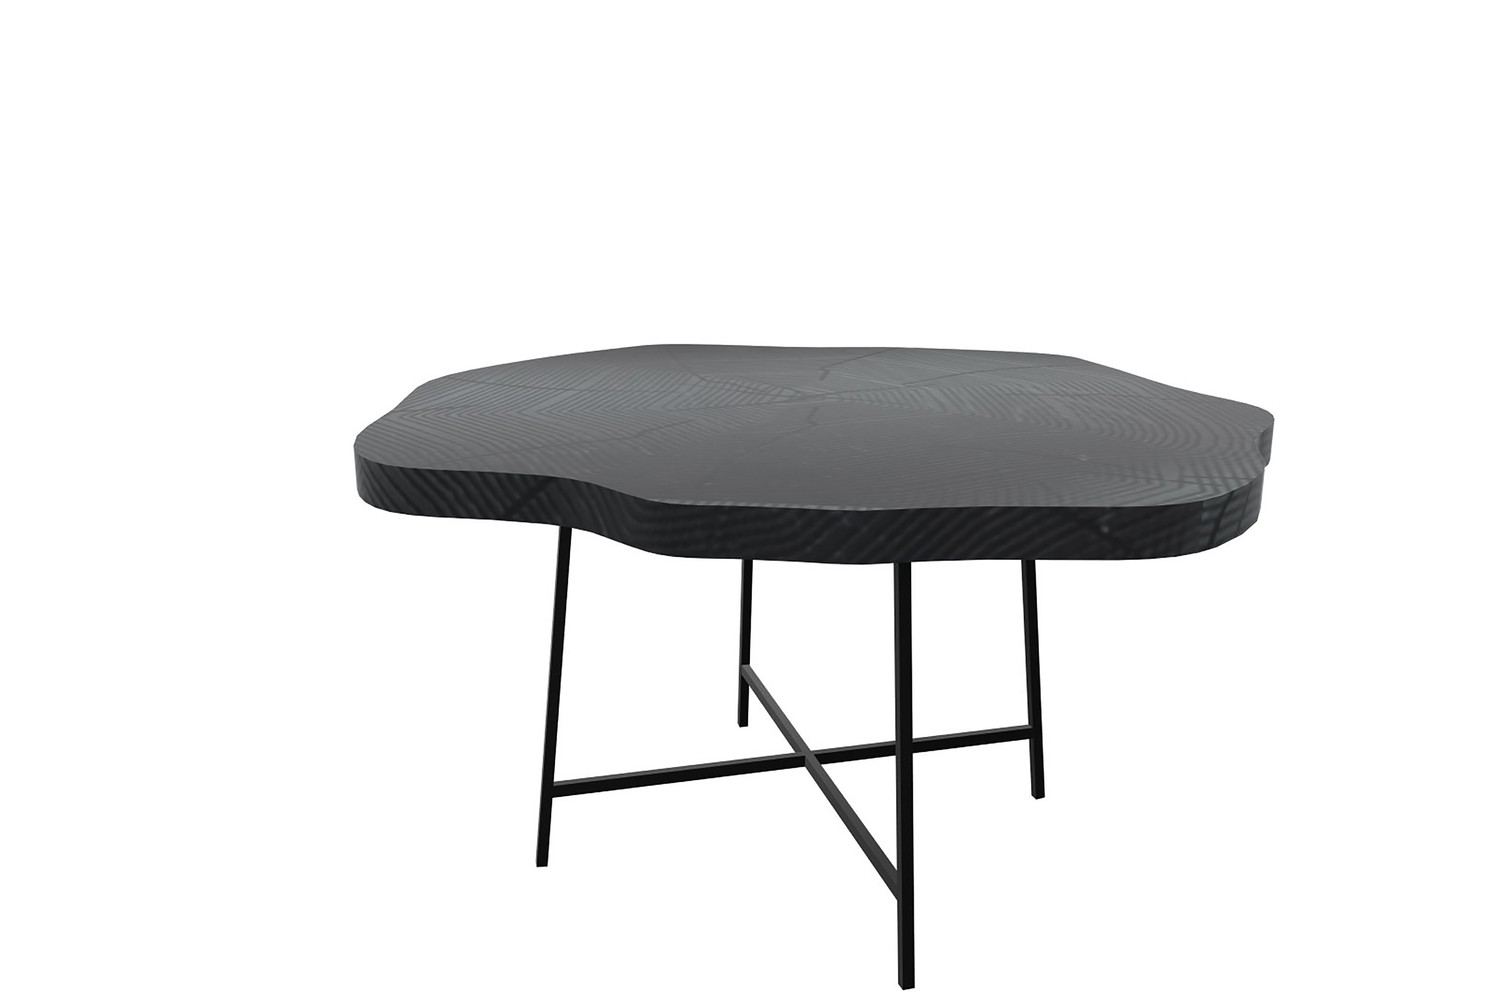 19" Modern Black Organic Shaped Wood And Metal End Table